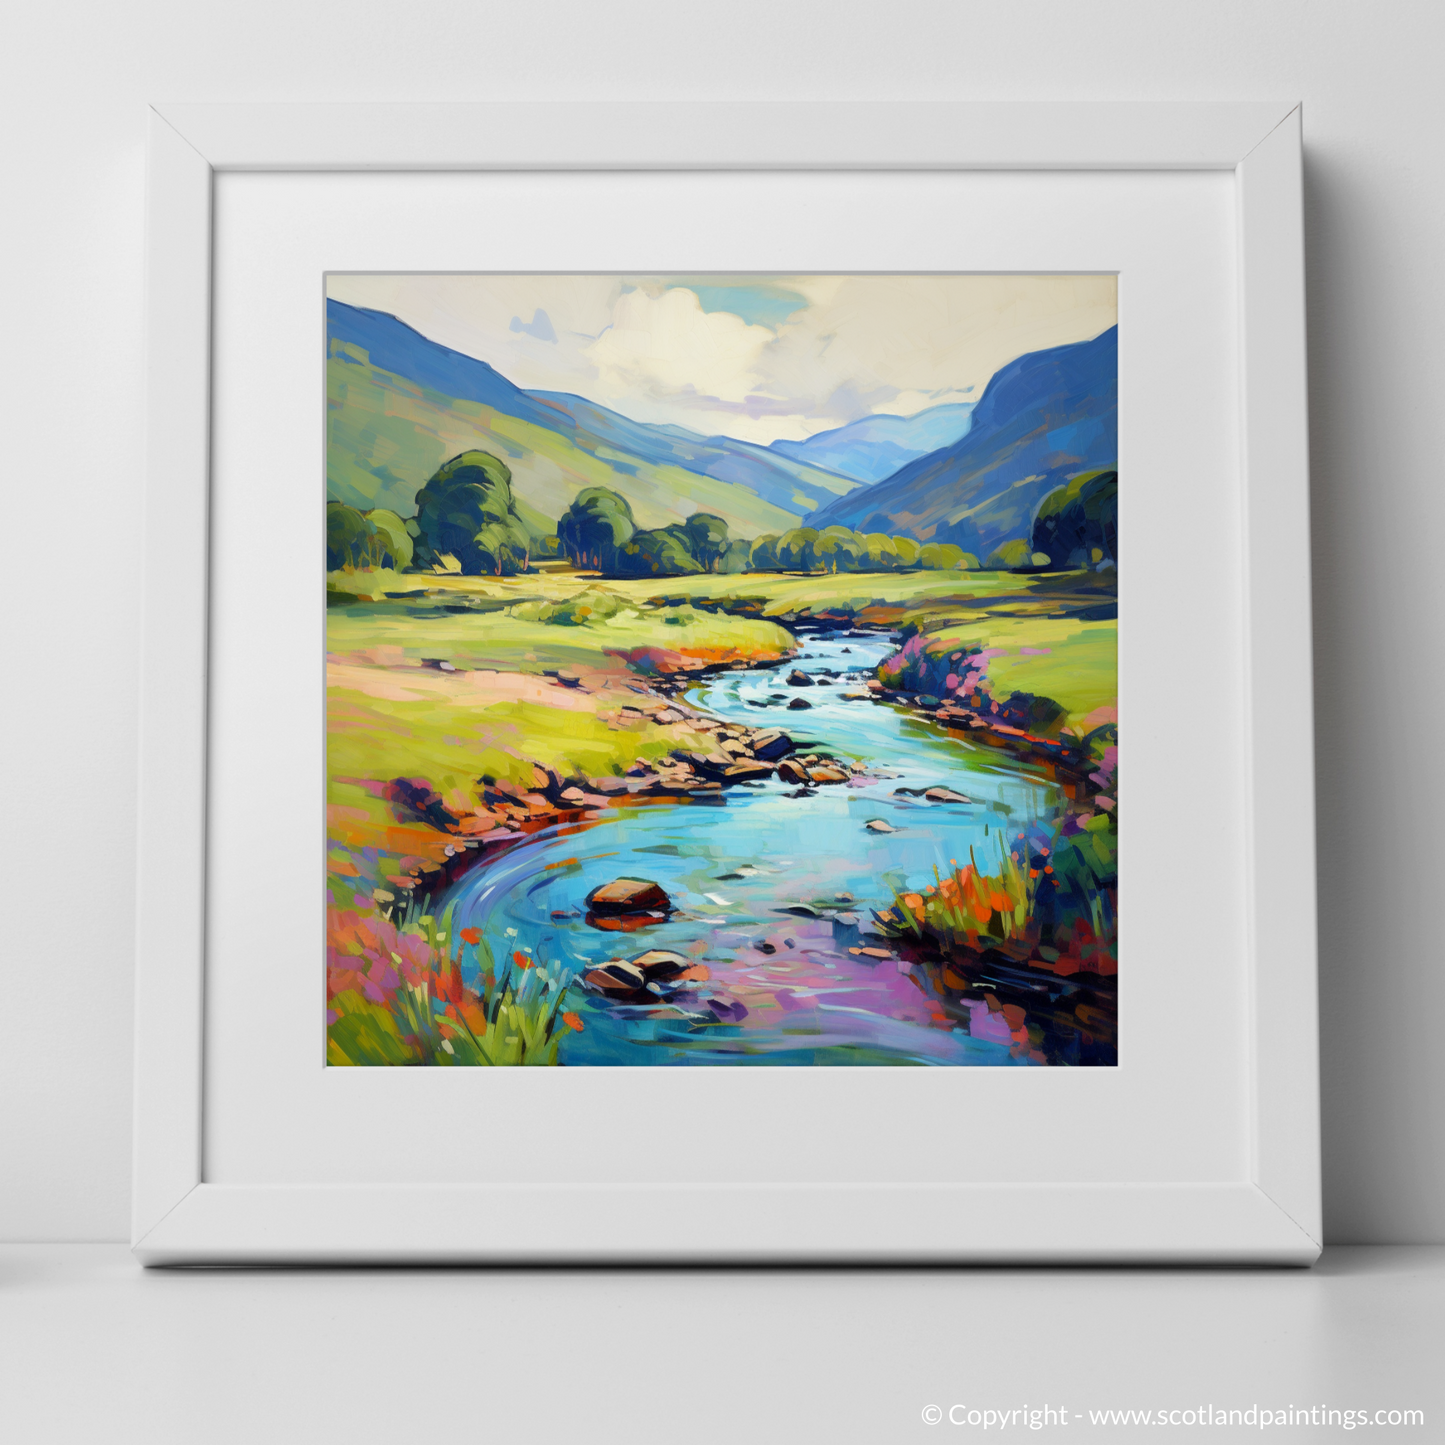 Art Print of Glen Lyon, Perthshire in summer with a white frame